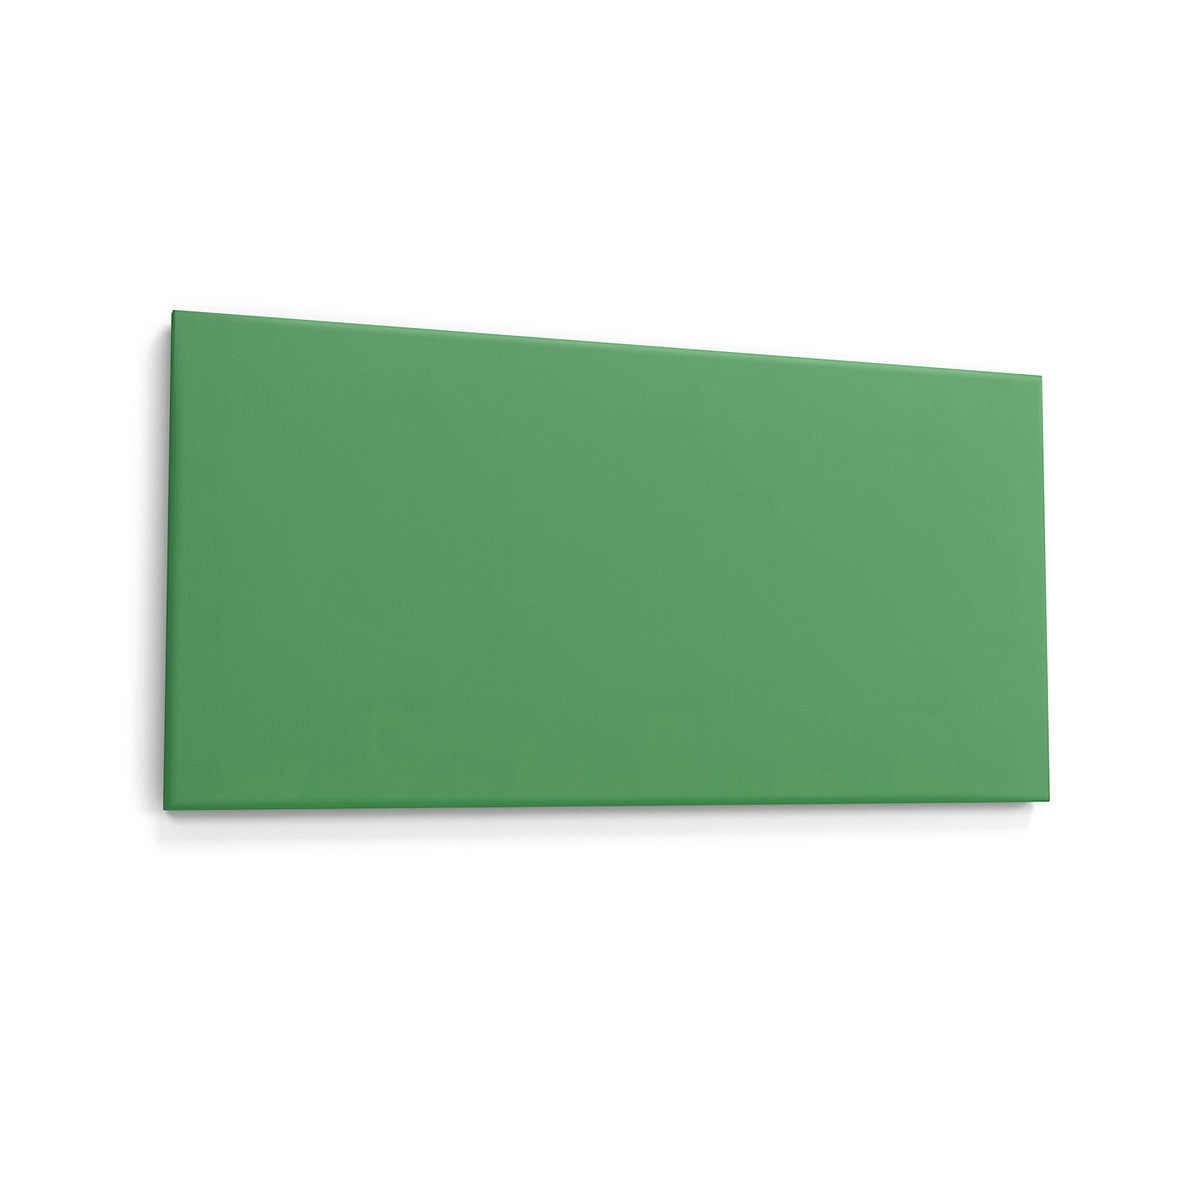 STRATOS™ Acoustic Wallboards 400mm x 800mm